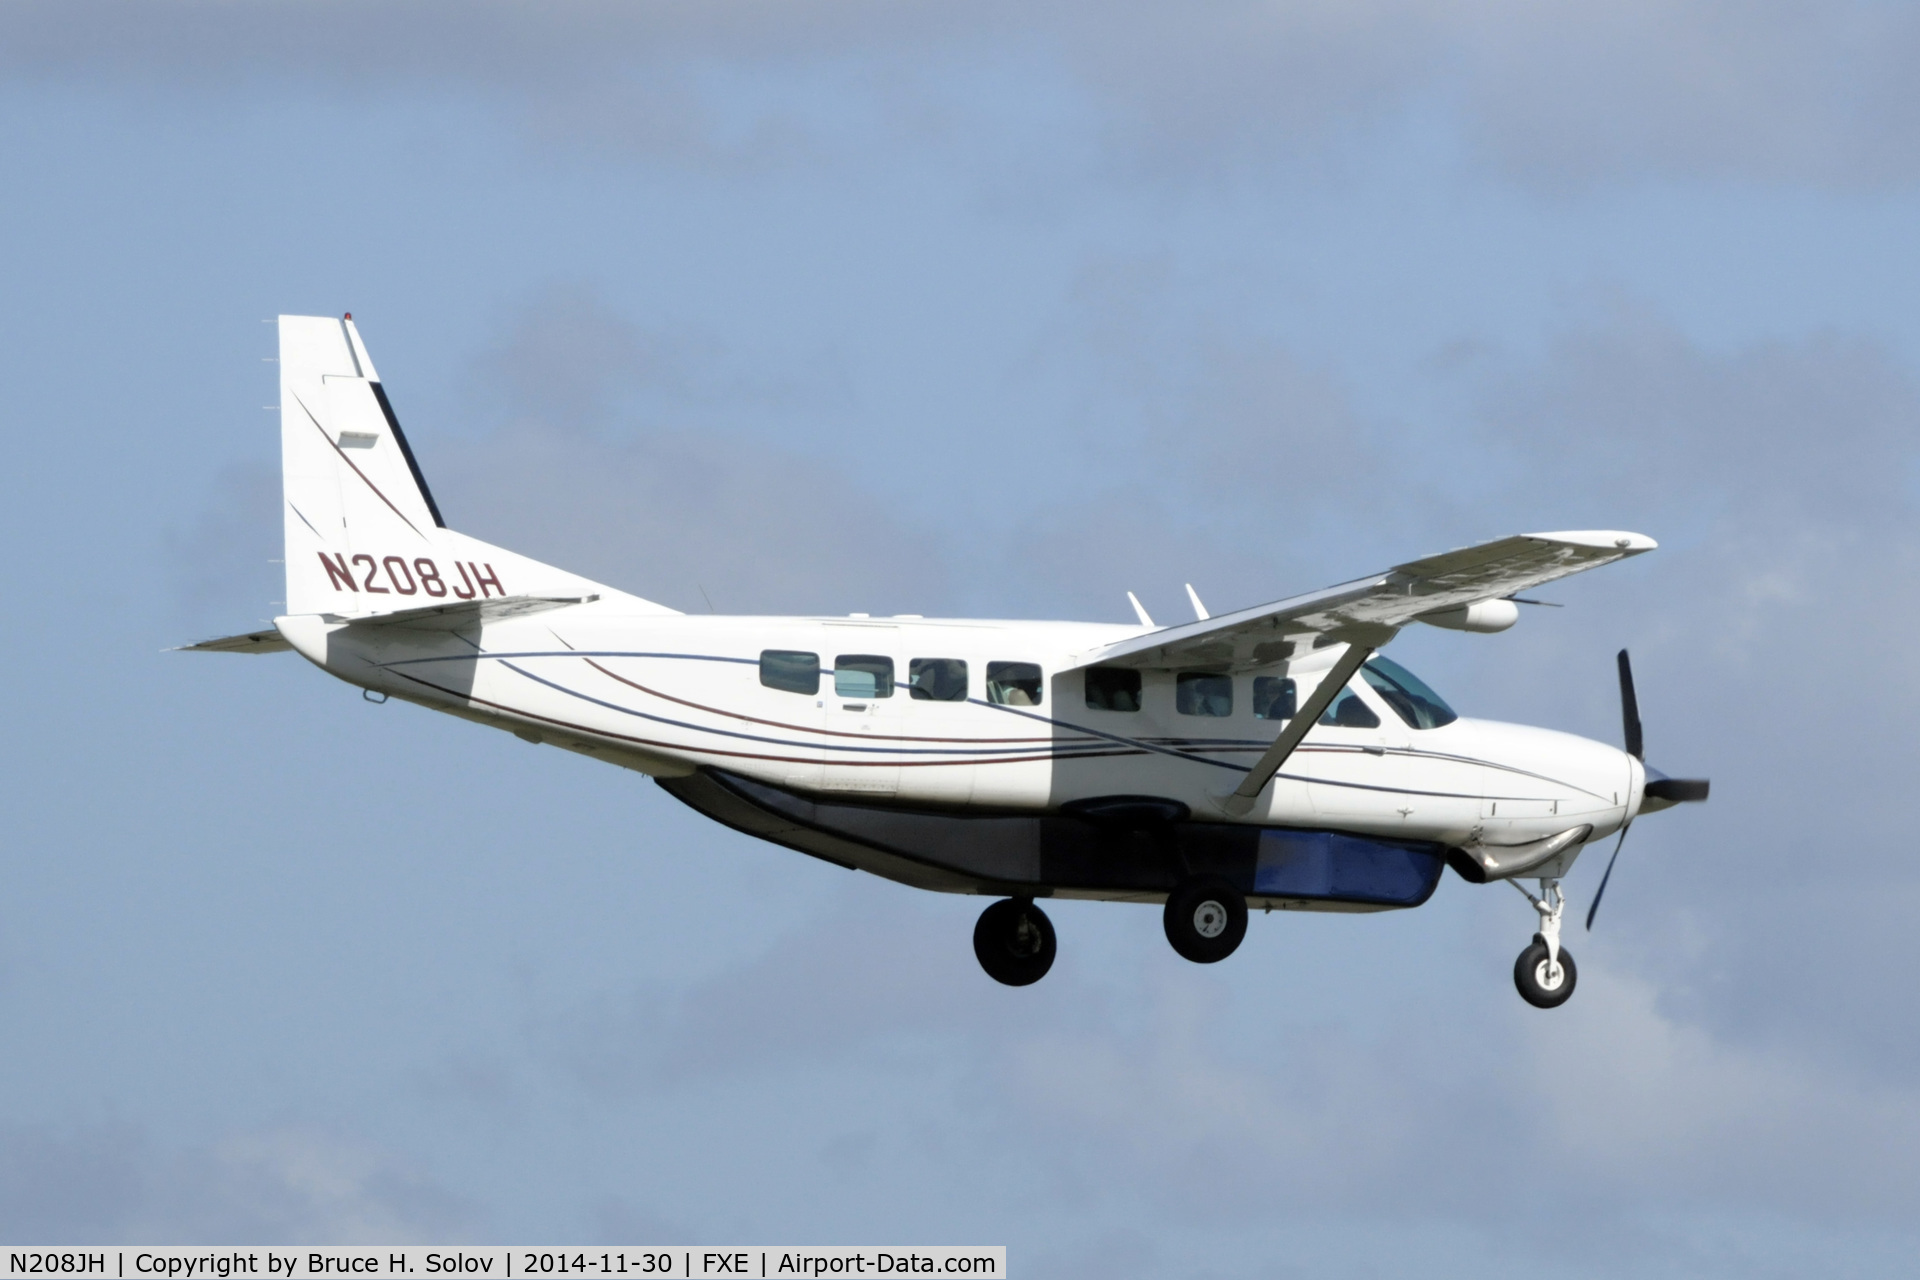 N208JH, 2005 Cessna 208B C/N 208B1144, on approach to FXE